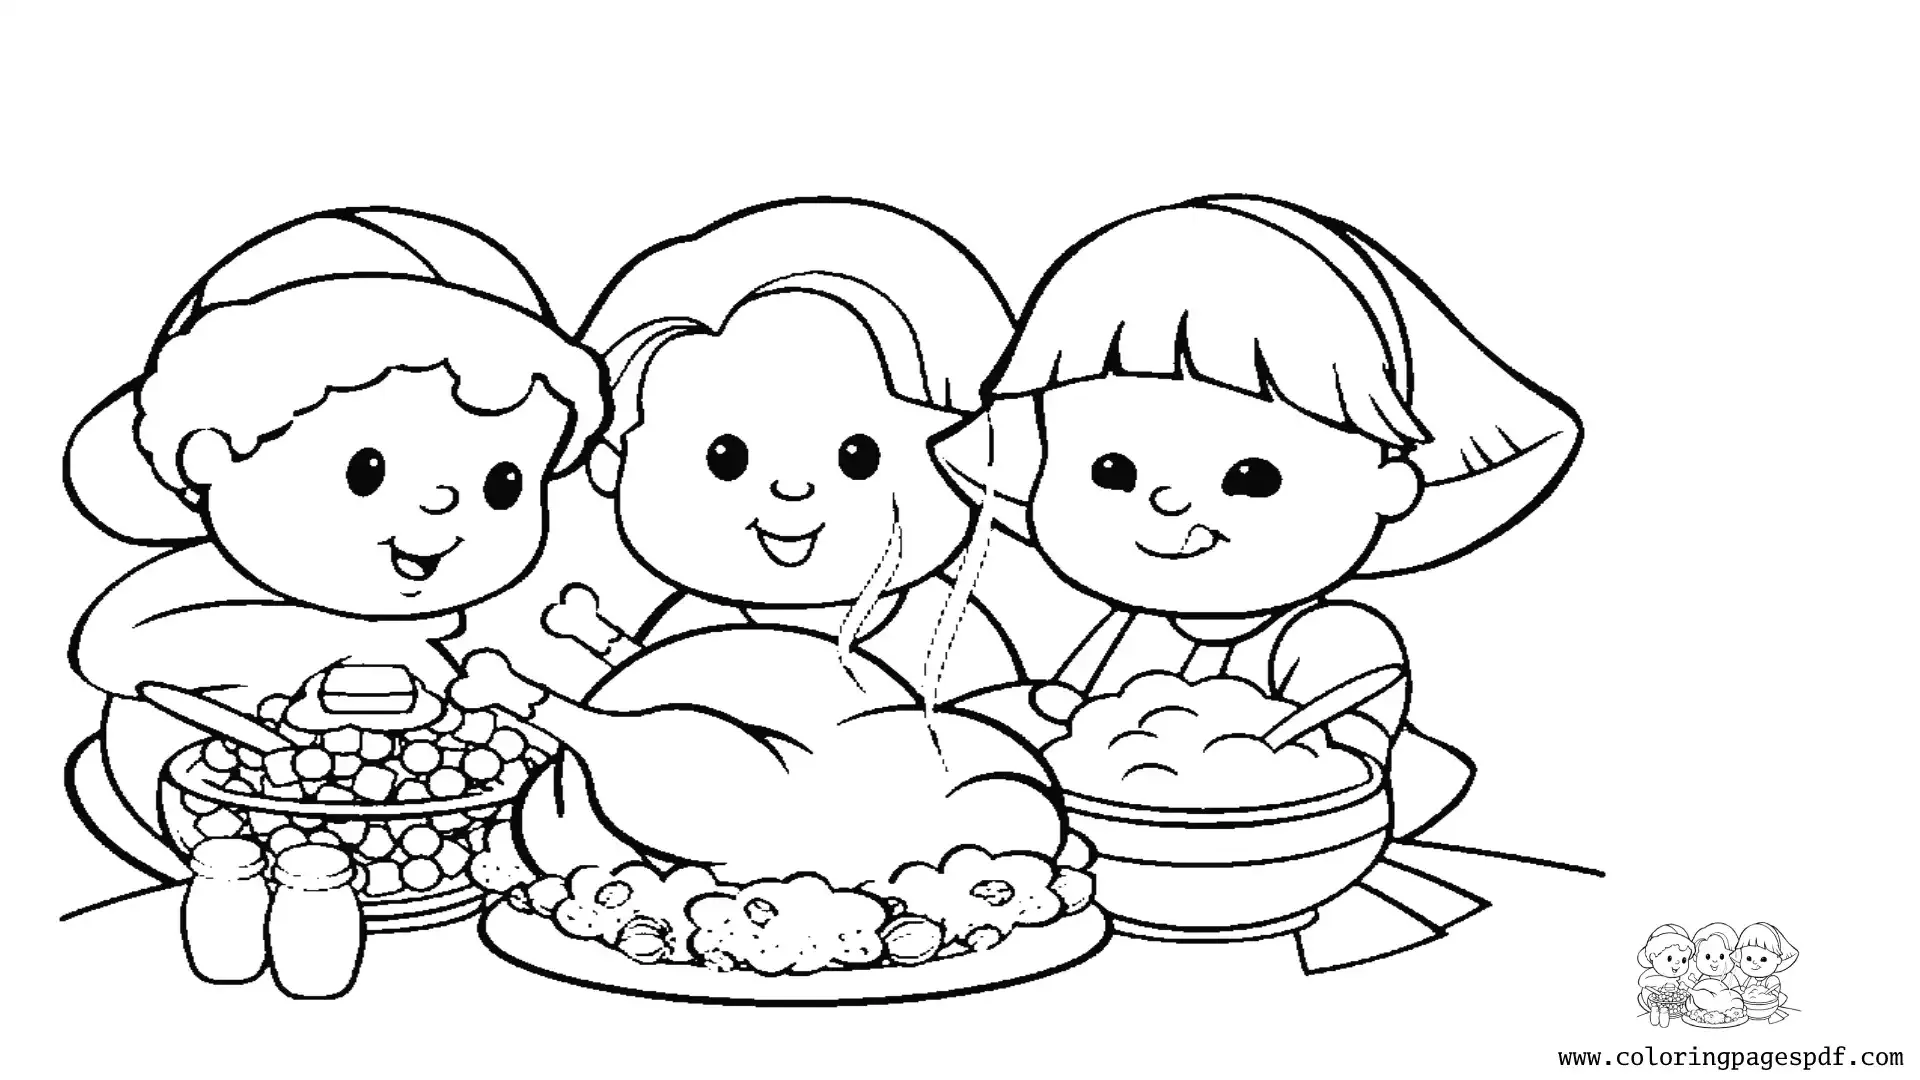 Coloring Page Of Kids Looking At Thanksgiving Food